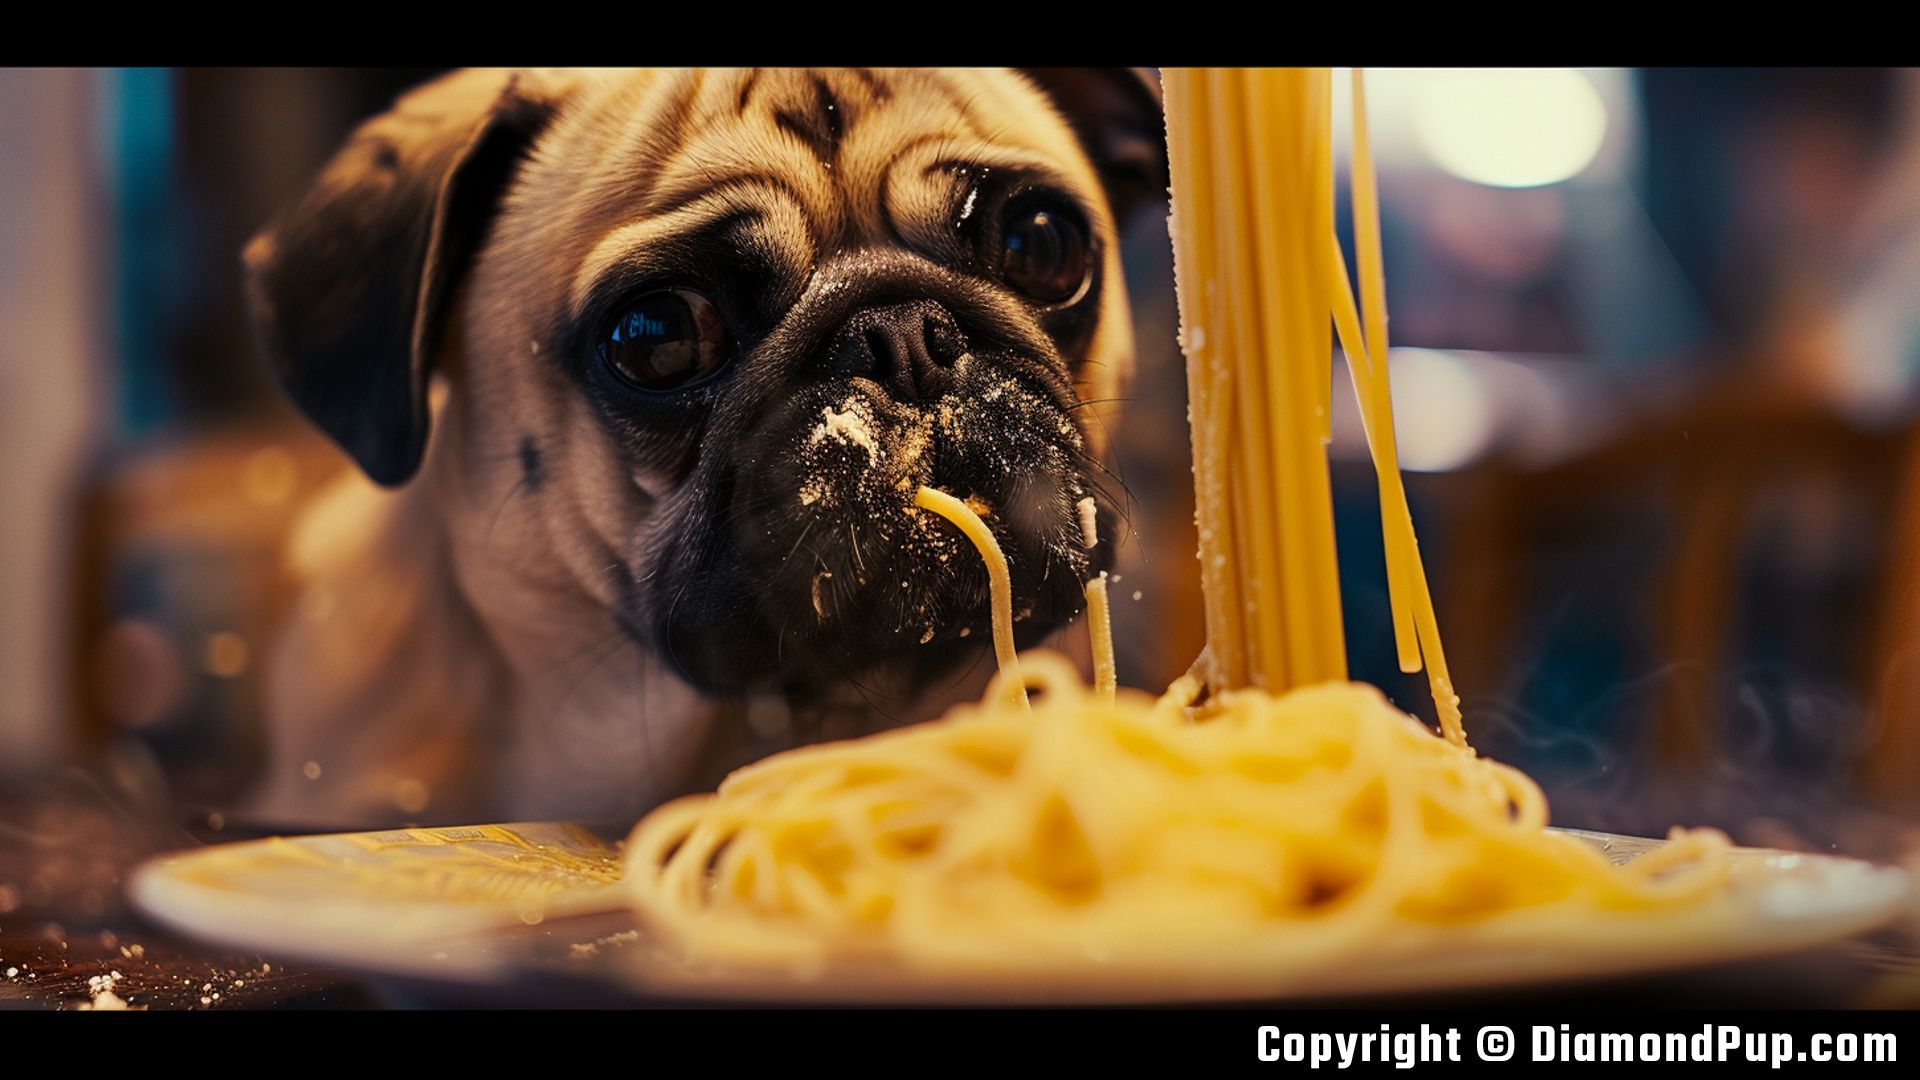 Image of a Playful Pug Snacking on Pasta